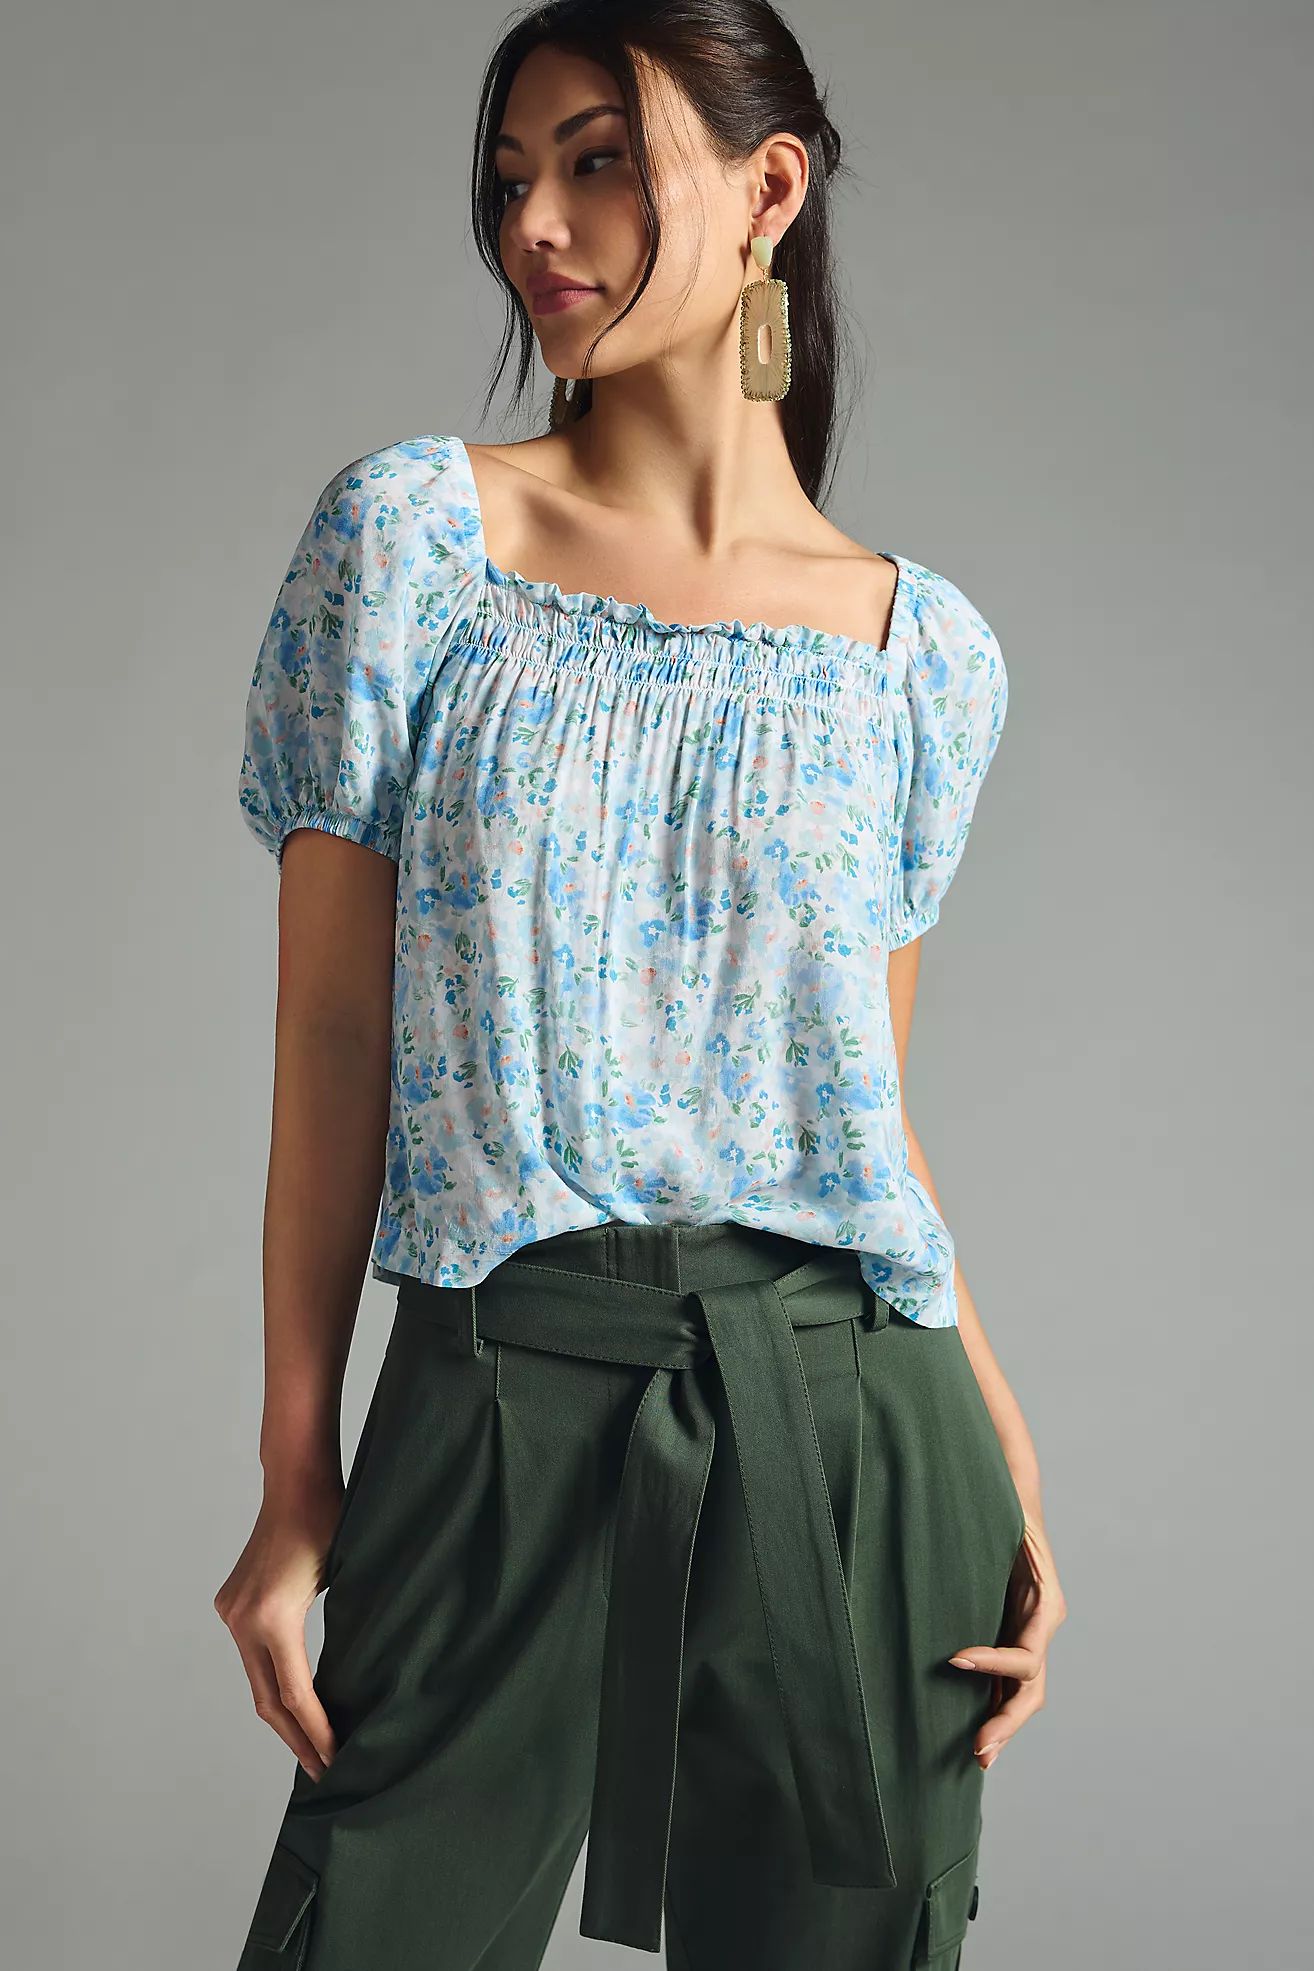 Cloth & Stone Smocked Bubble Top | Anthropologie (US)